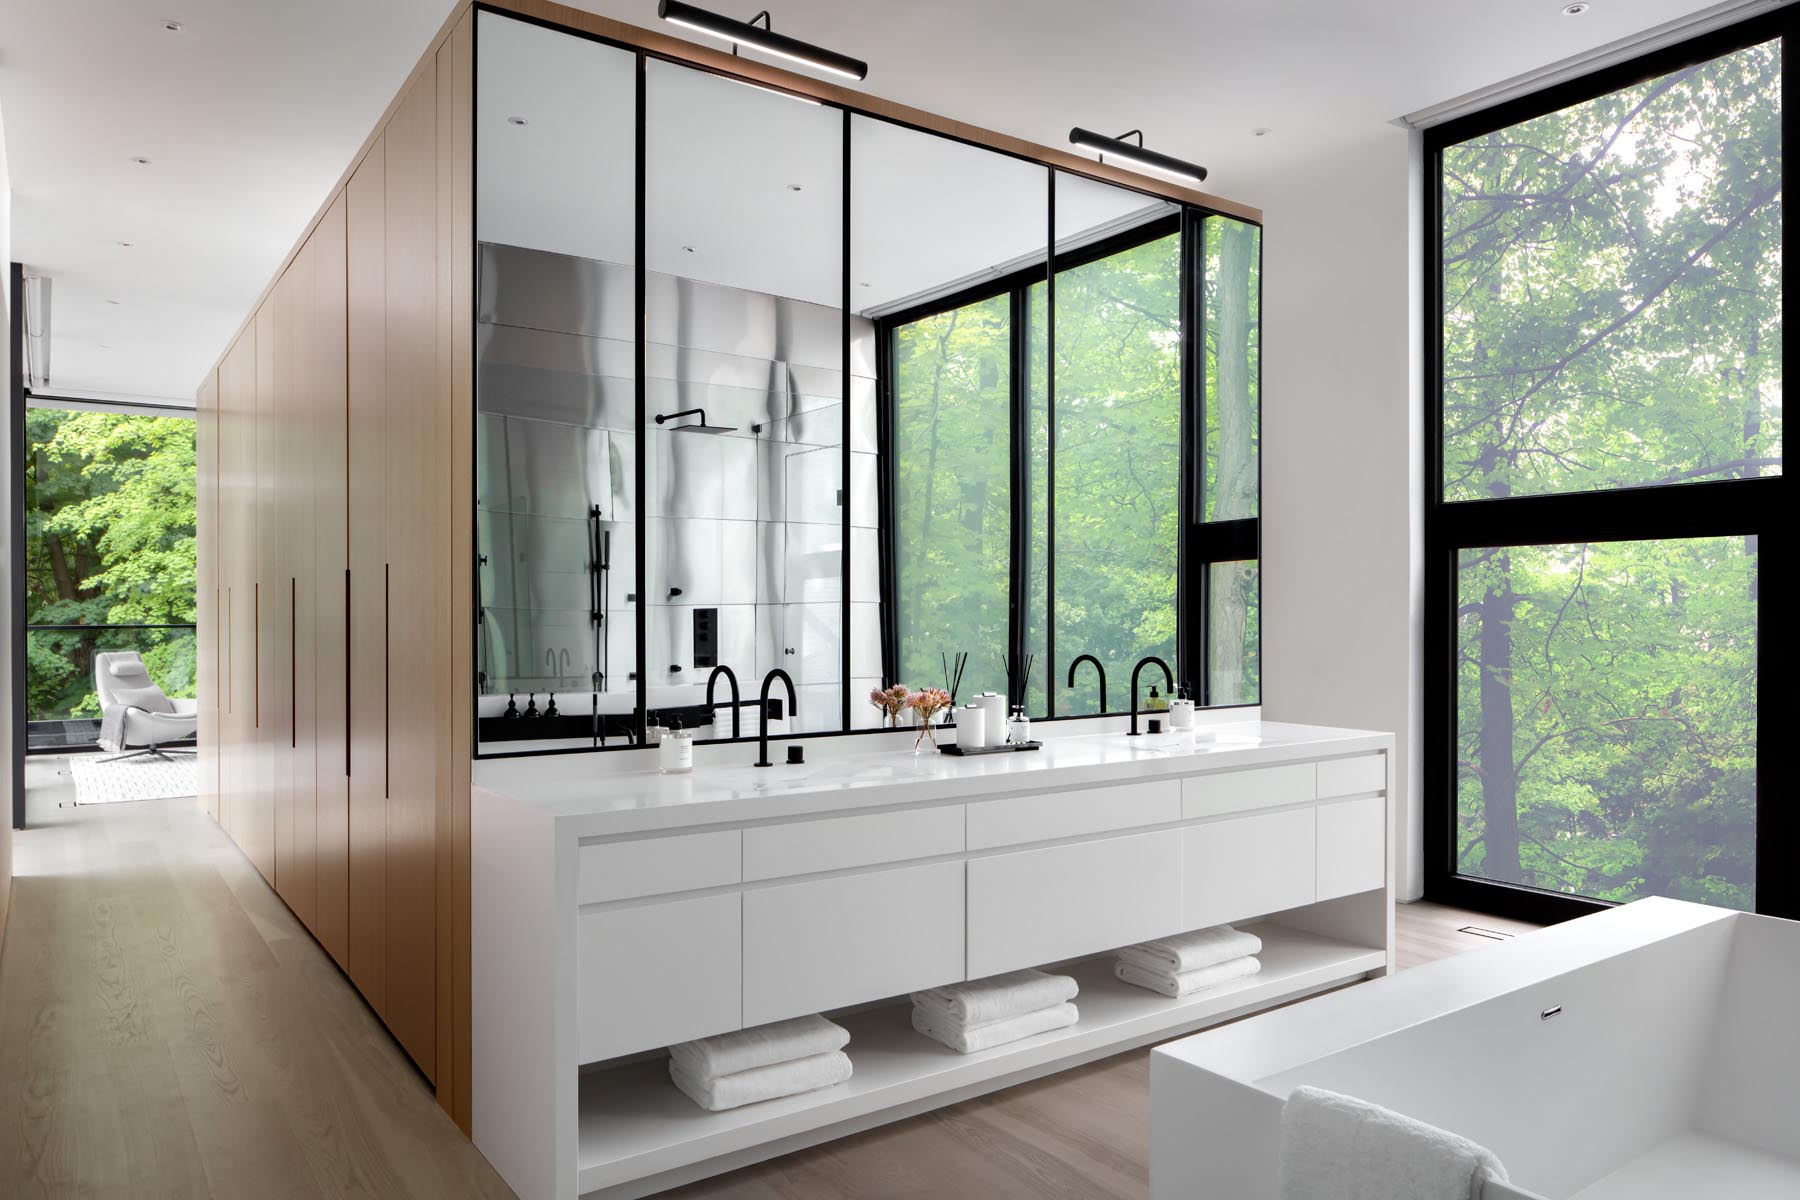 A wall of wood closets link the bedroom to this modern en-suite bathroom, that showcases a white vanity with large mirrors, a built-in bathtub, and a double shower with glass surround.